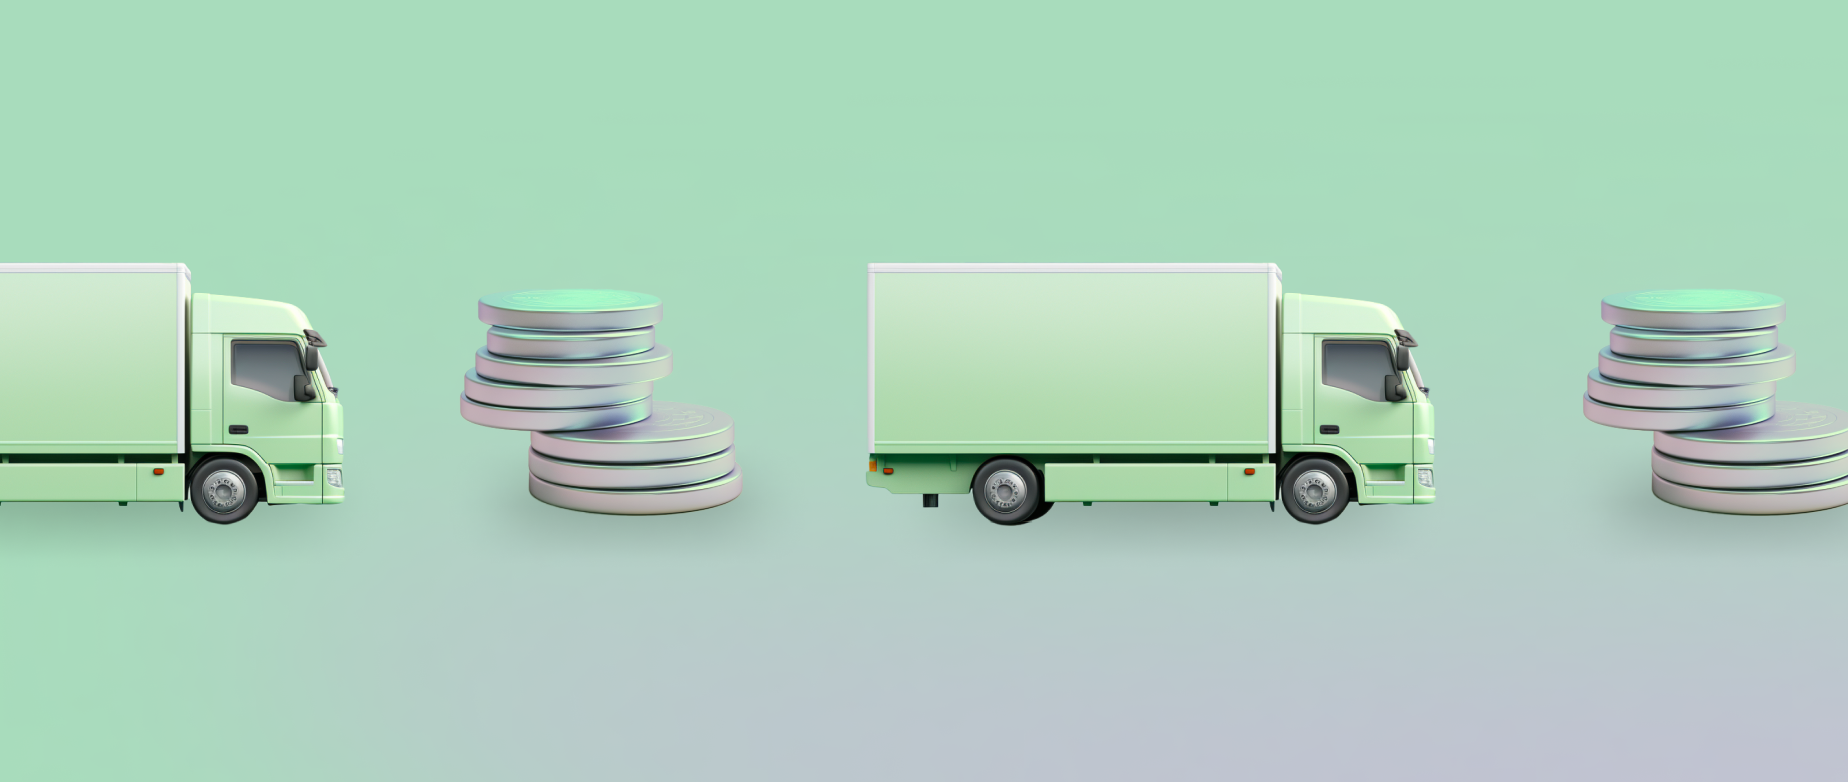 Alternating green trucks with stacks of silver coins on a green background.